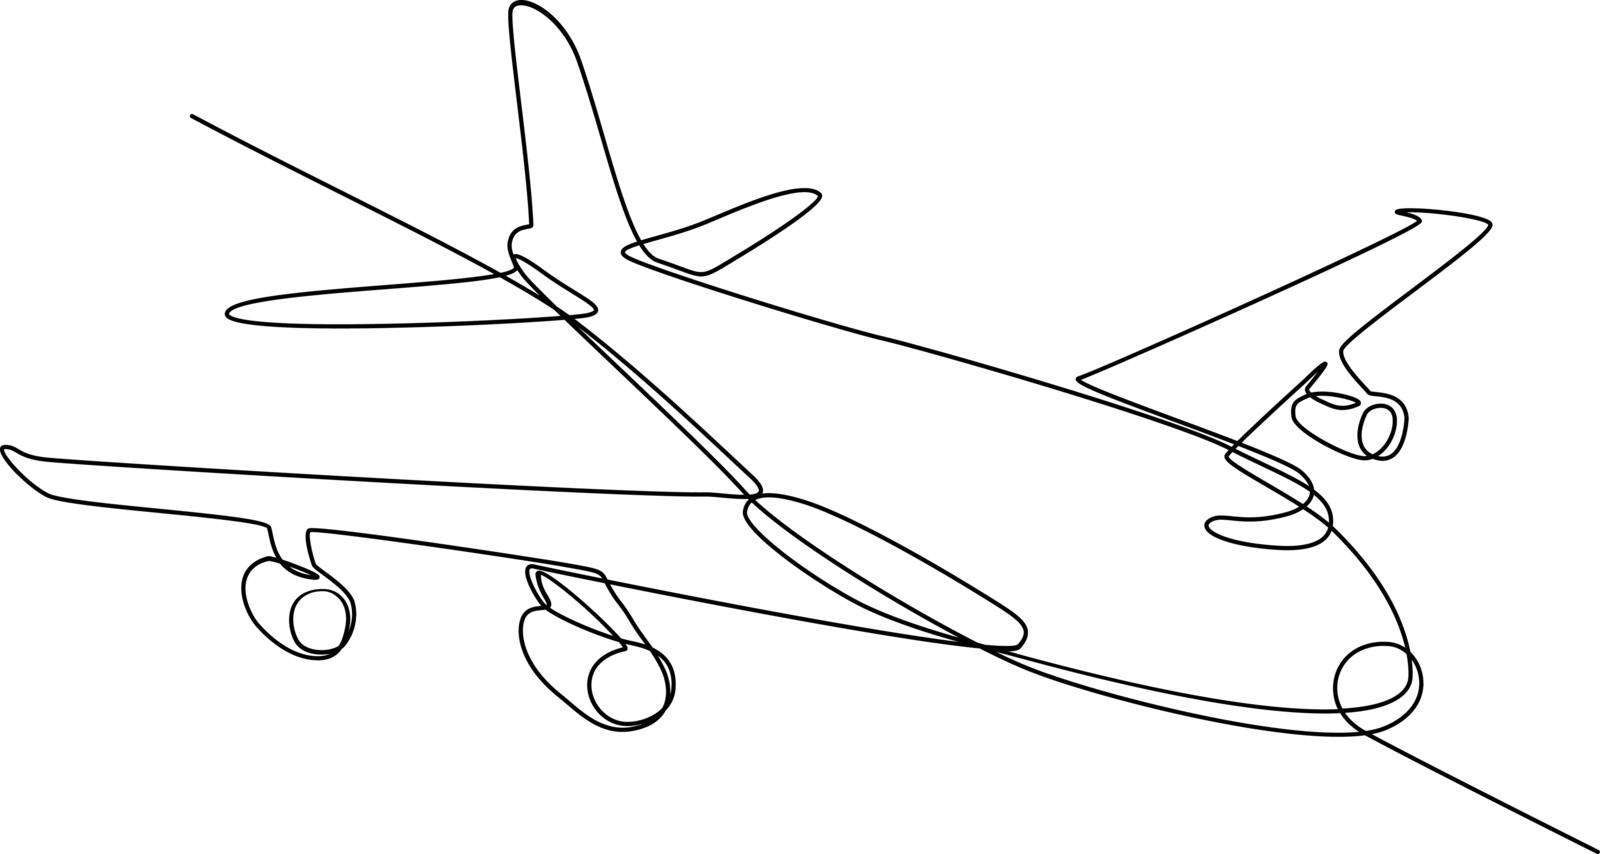 Continuous line illustration of jumbo jet passenger plane airliner or airplane flying in full flight in mid-air done in black and white monoline style.